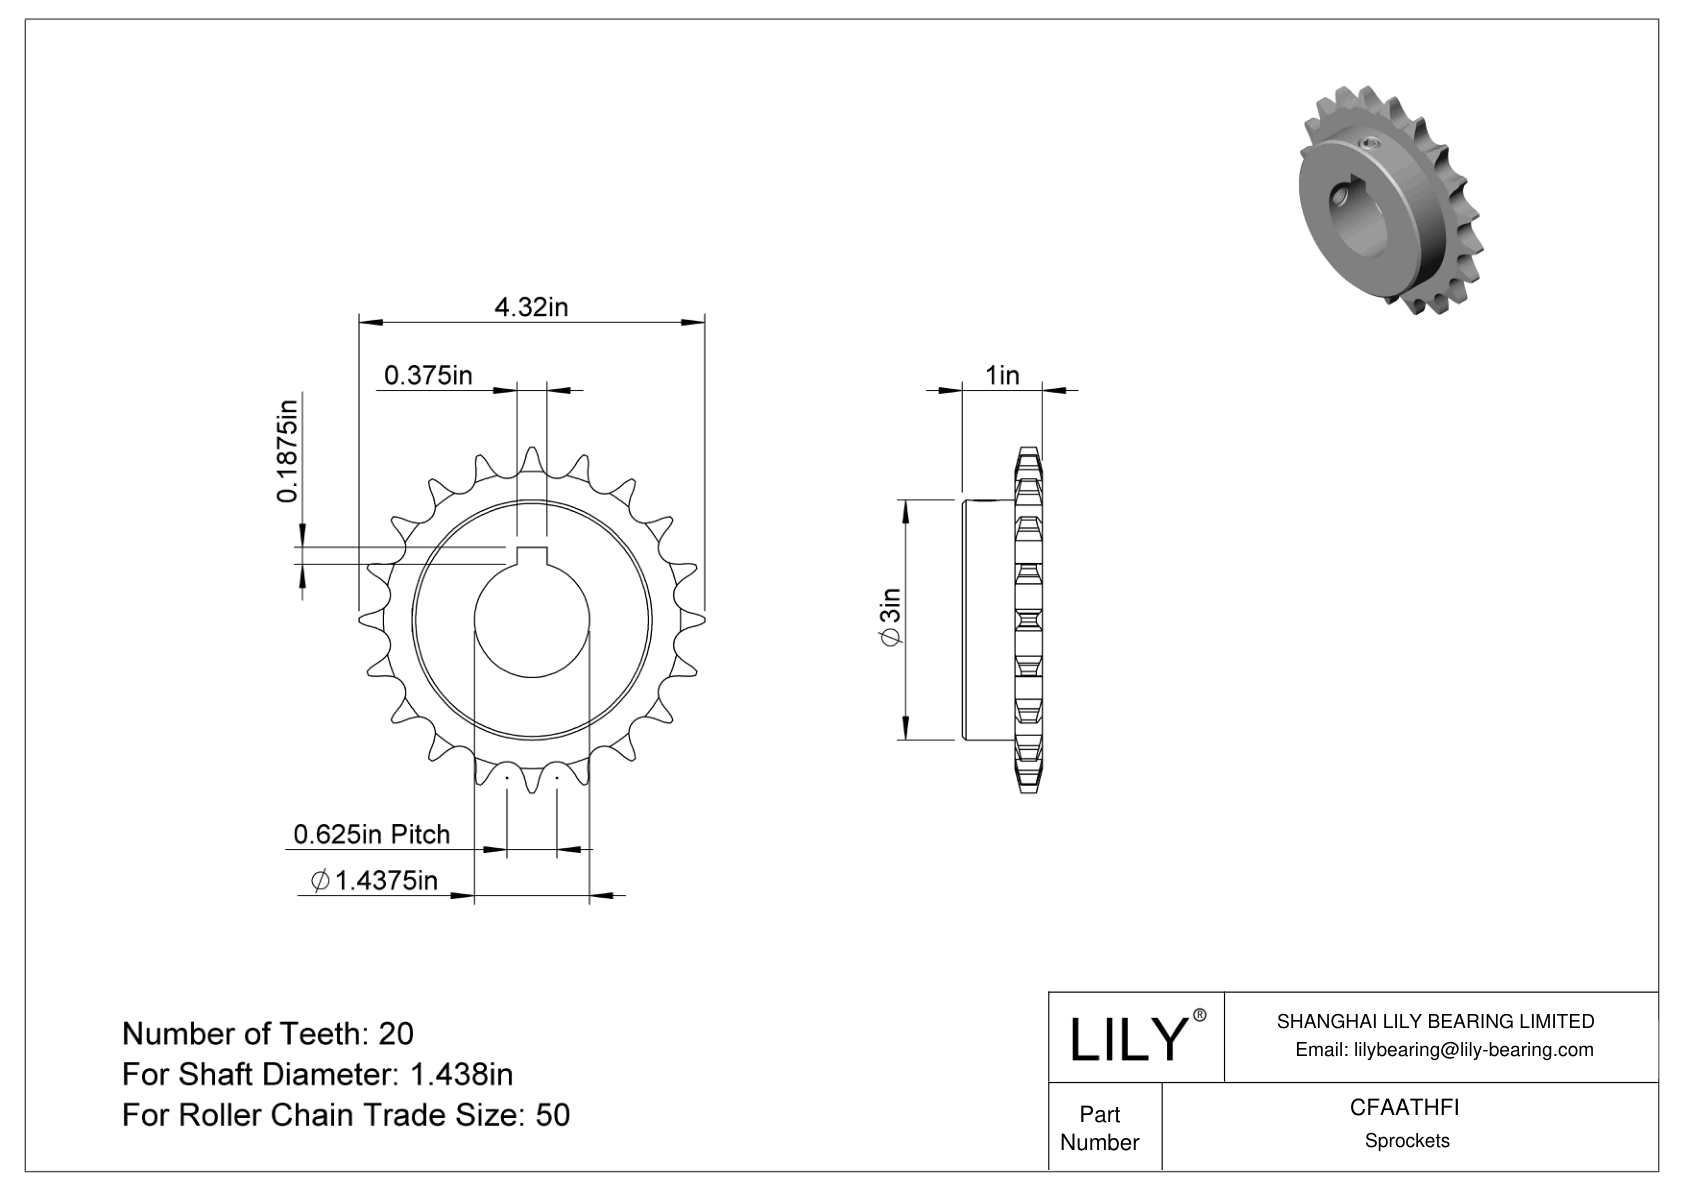 CFAATHFI Wear-Resistant Sprockets for ANSI Roller Chain cad drawing